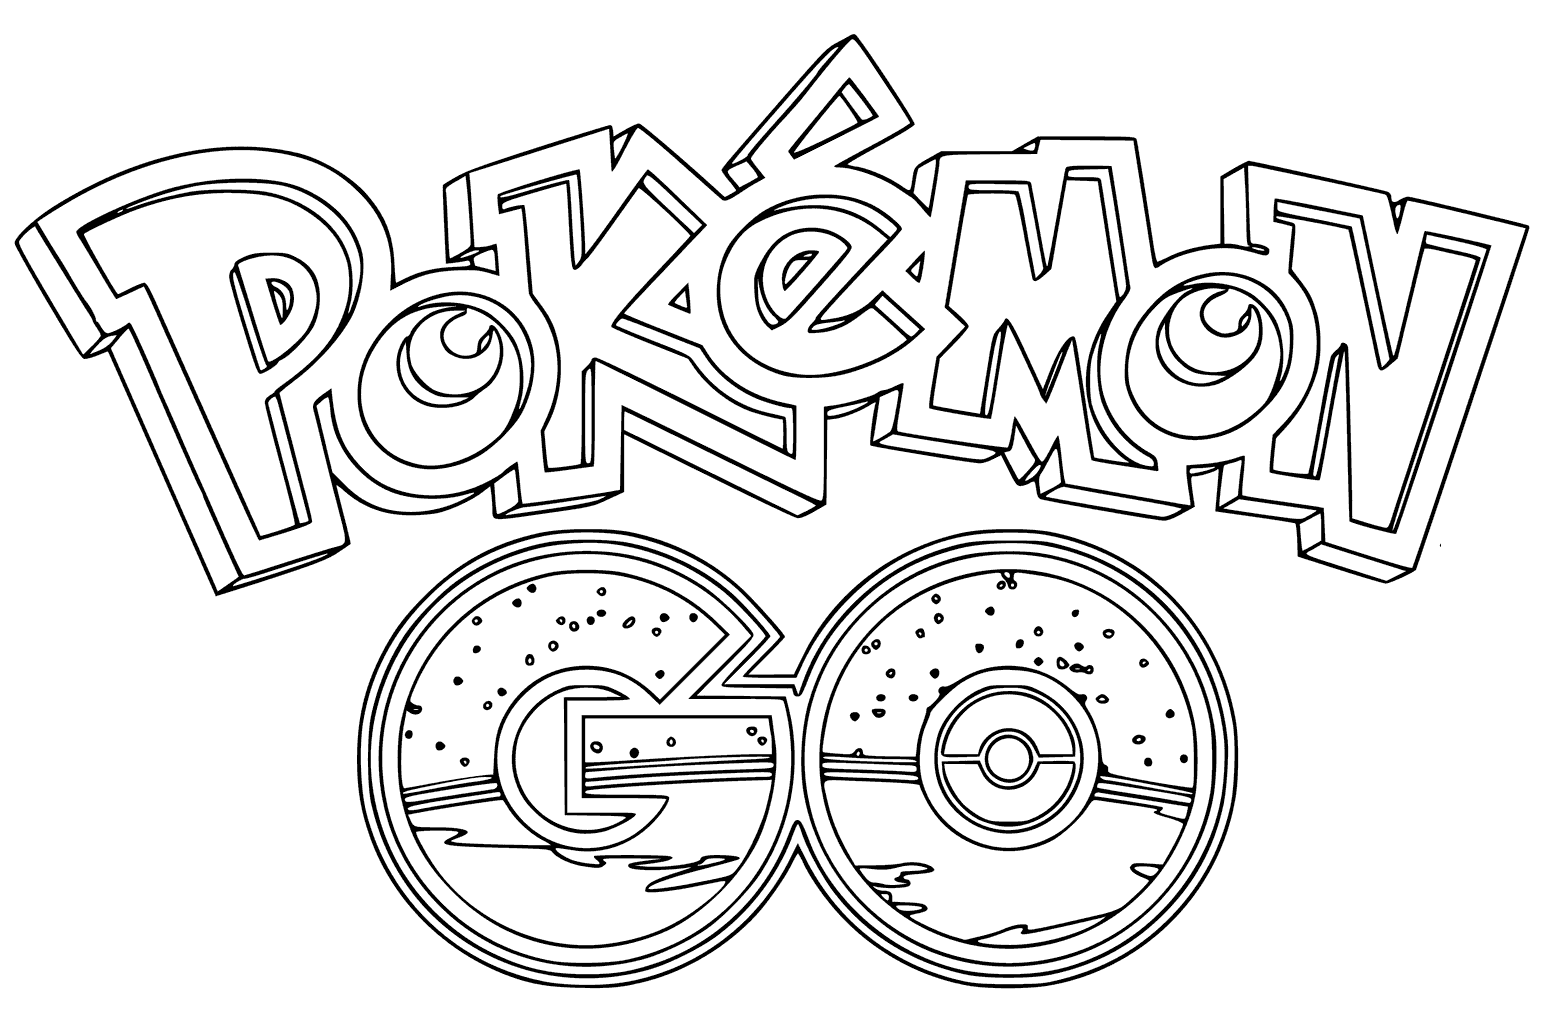 Pokemon Go Coloring Pages - Best Coloring Pages For Kids